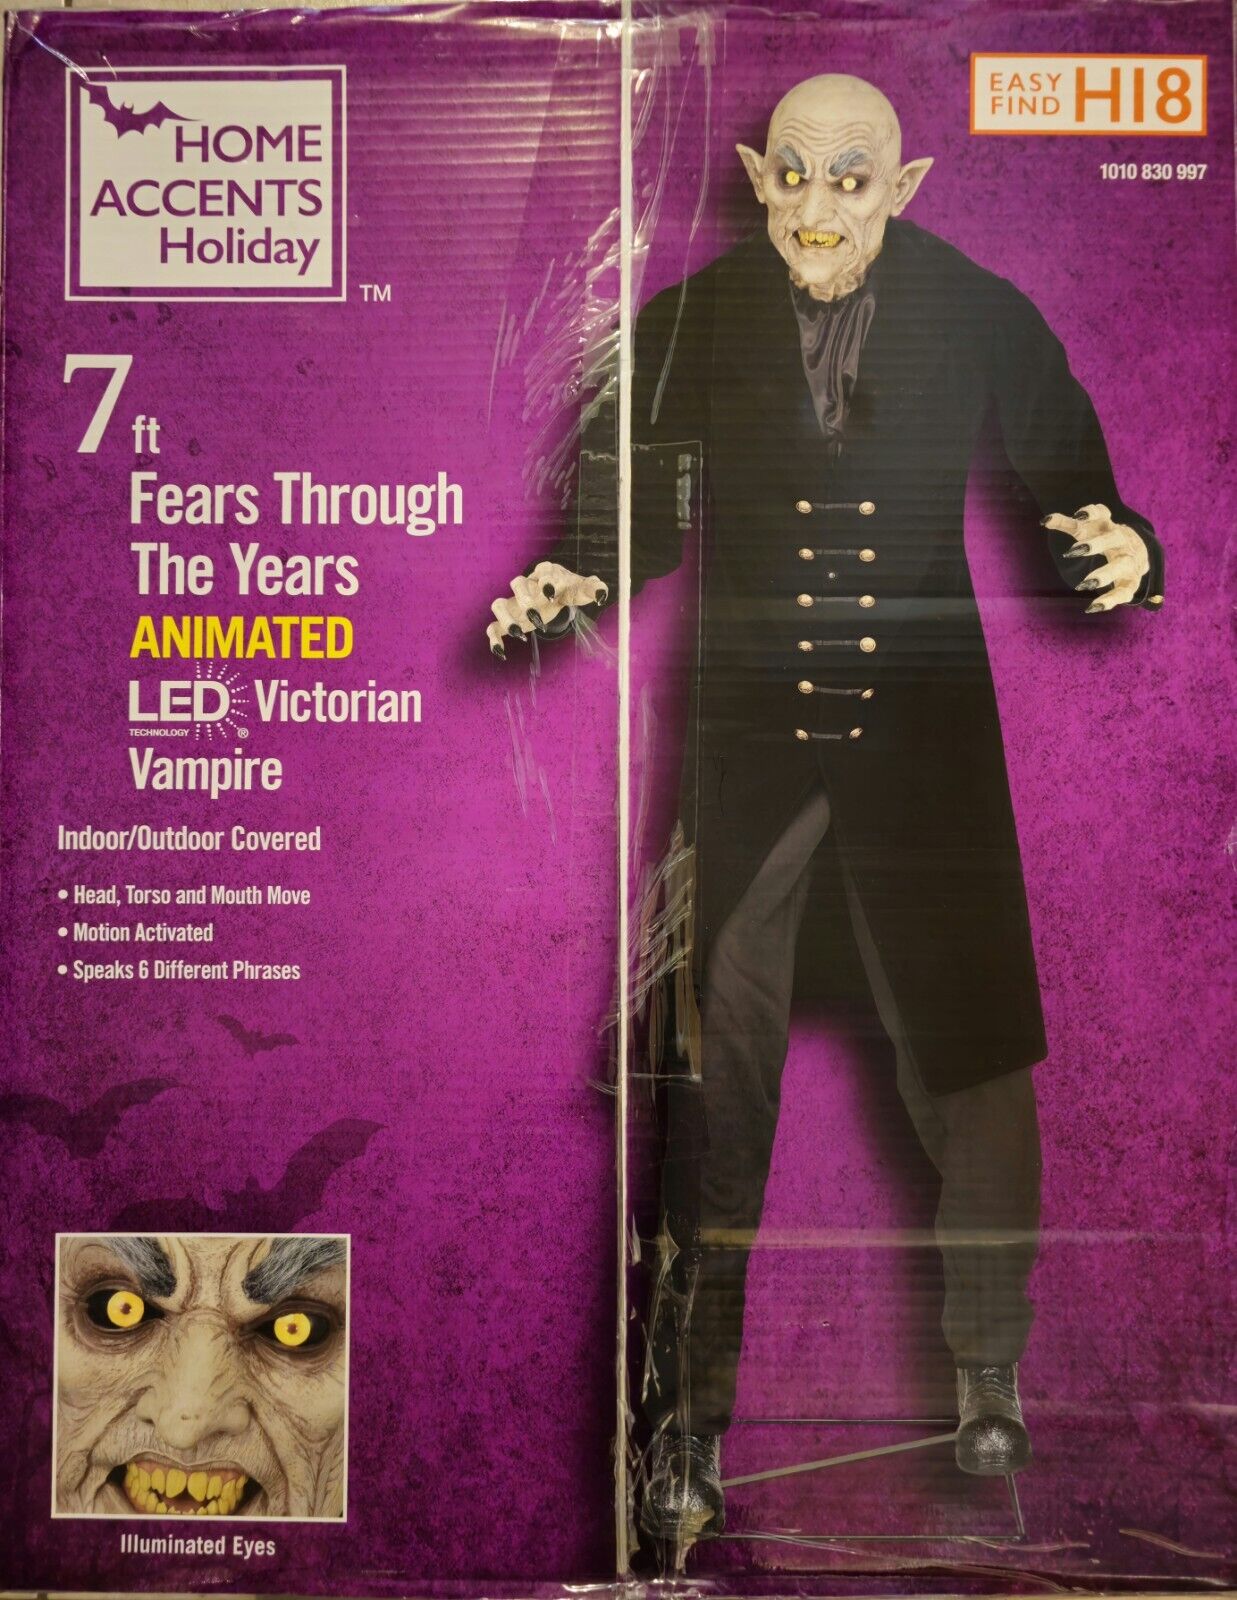 Brand New (unopened) 7ft Fears Through The Years Animated LED Victorian Vampire 